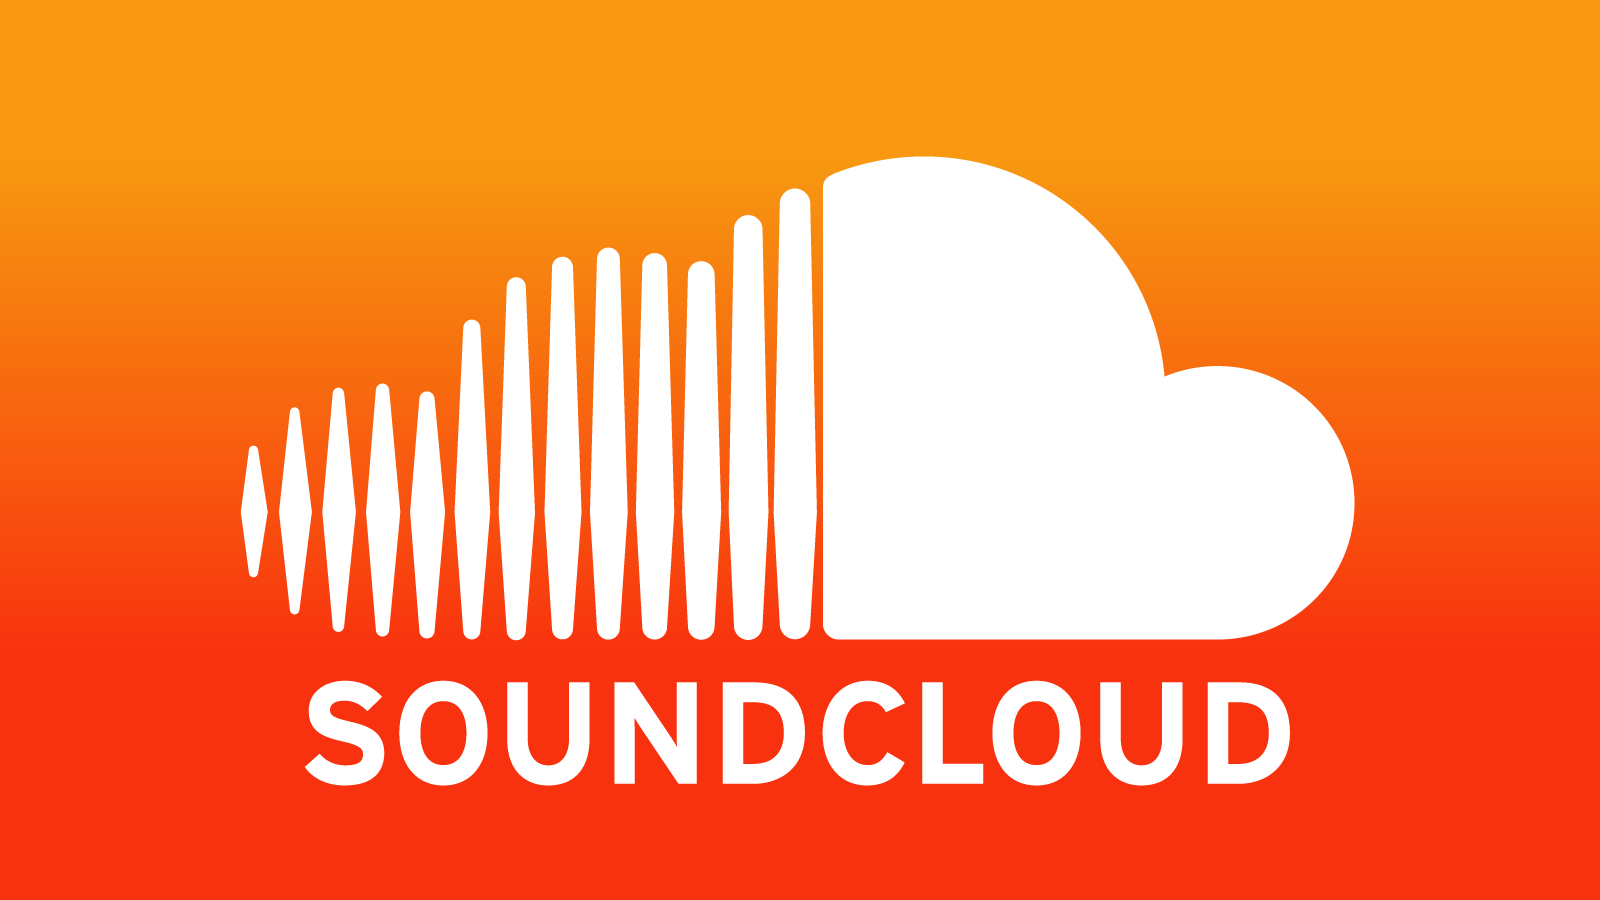 How Much Does The Music Sharing Platform Soundcloud Pay Per Stream? OtakuKart